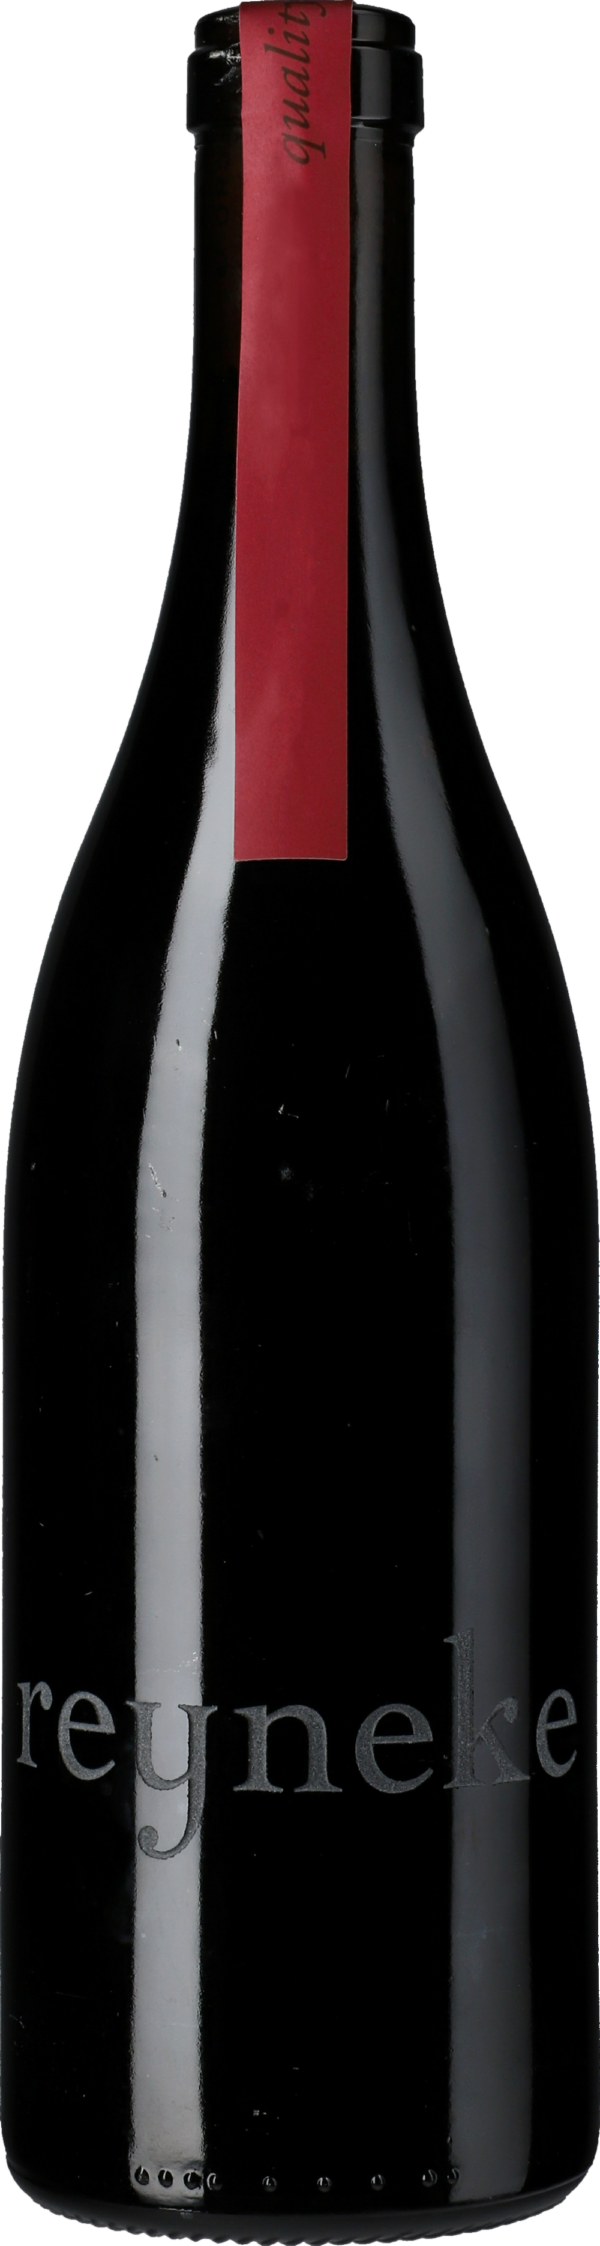 Product image of Reyneke Reserve Red 2018 from 8wines